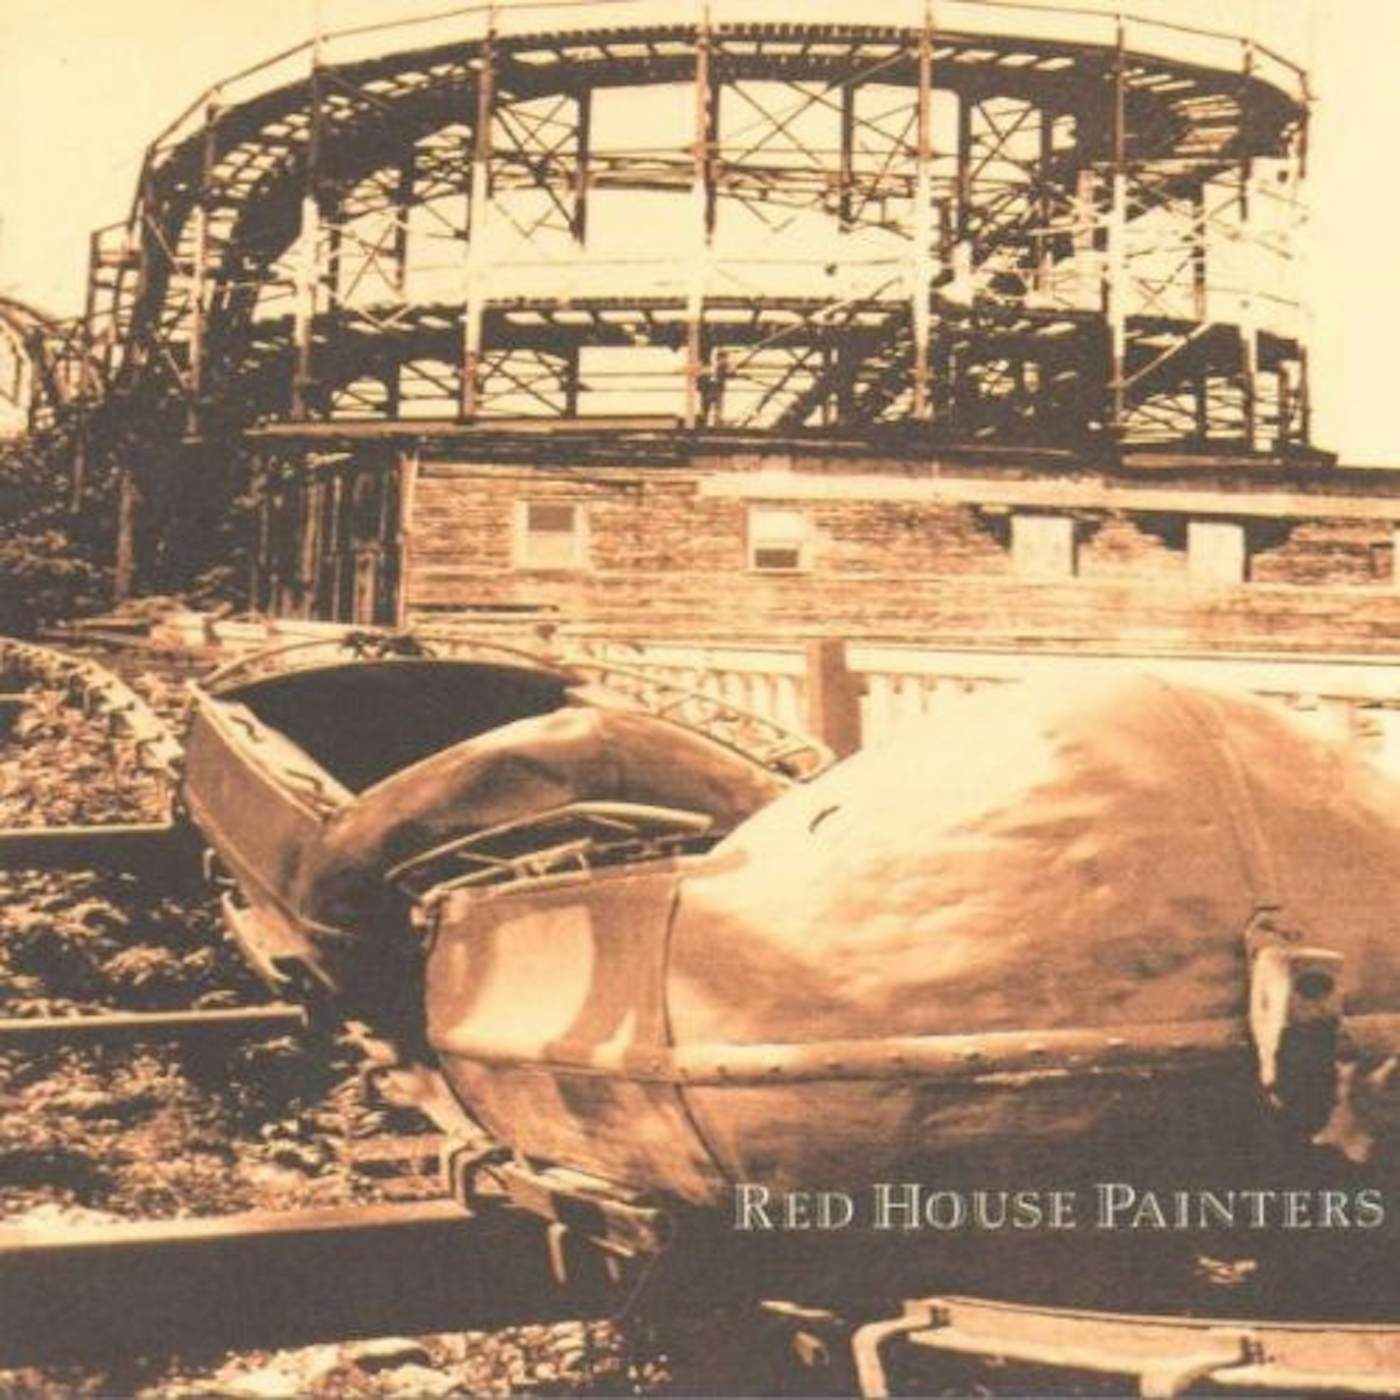 RED HOUSE PAINTERS 1 CD